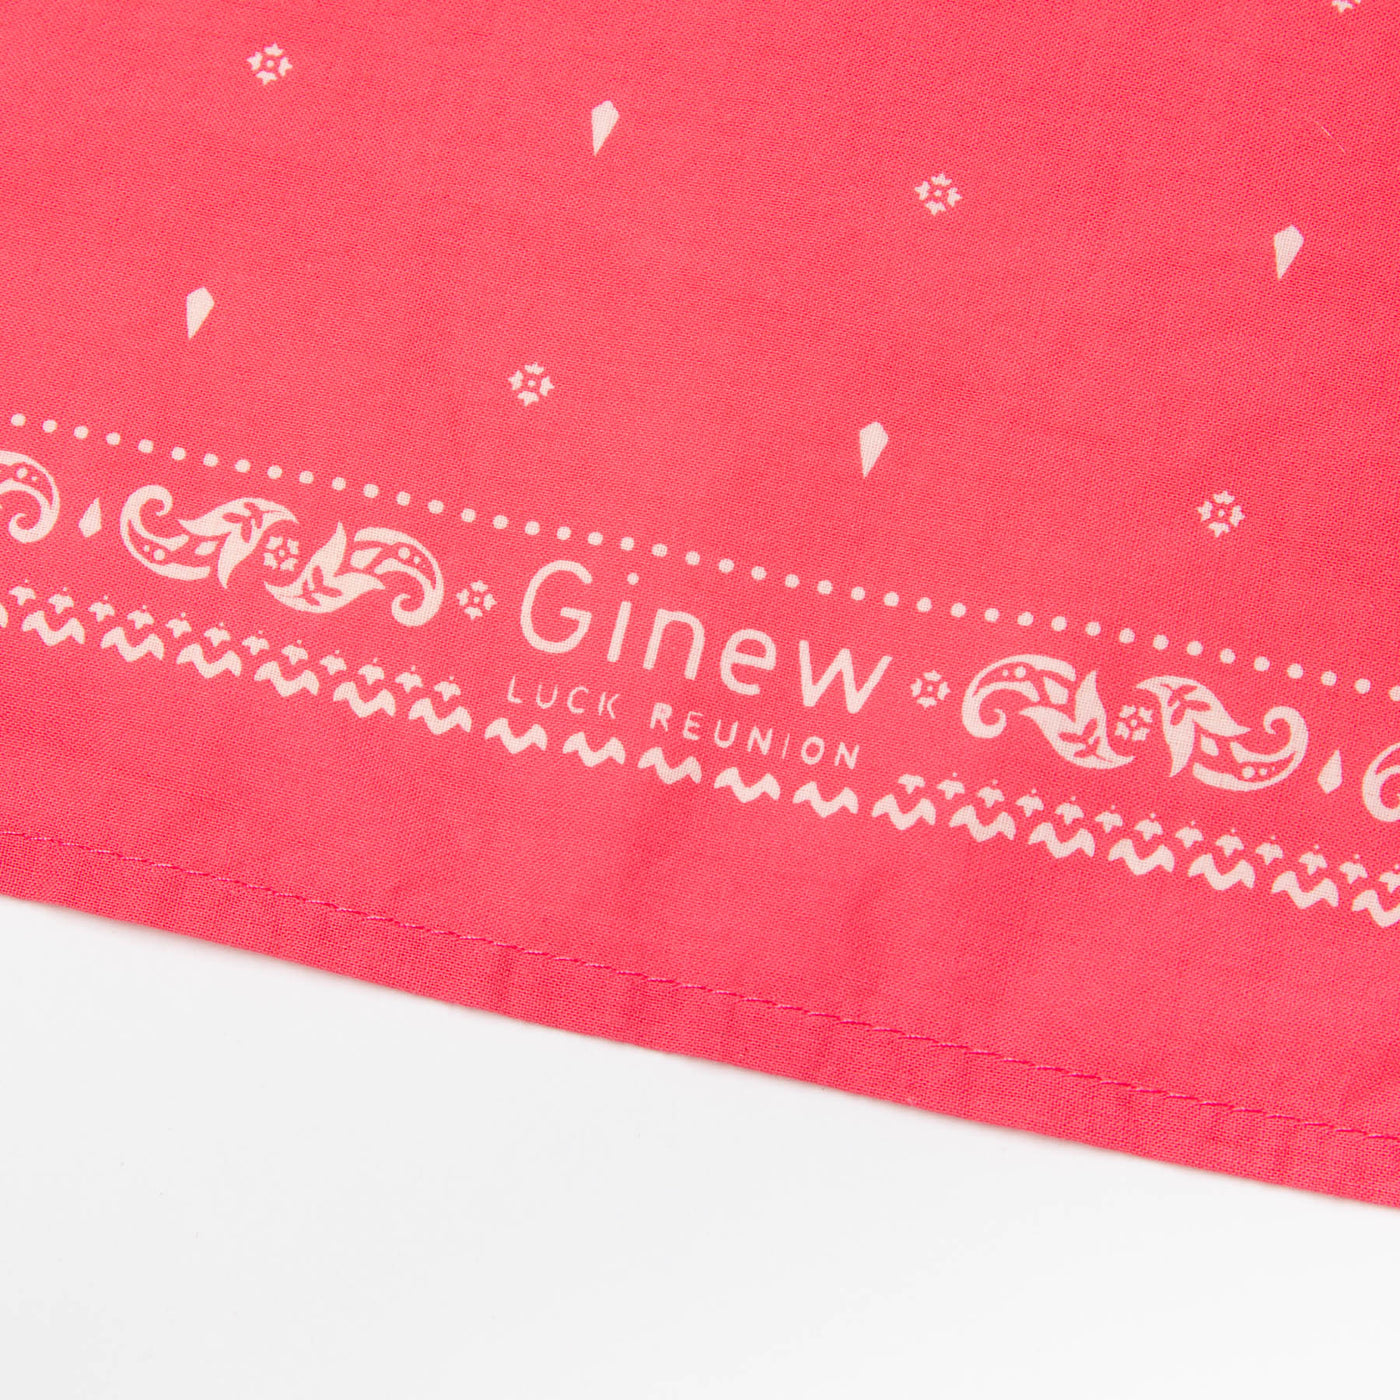 coral pink bandana with white design of an outline of a buffalo and the words Luck TX